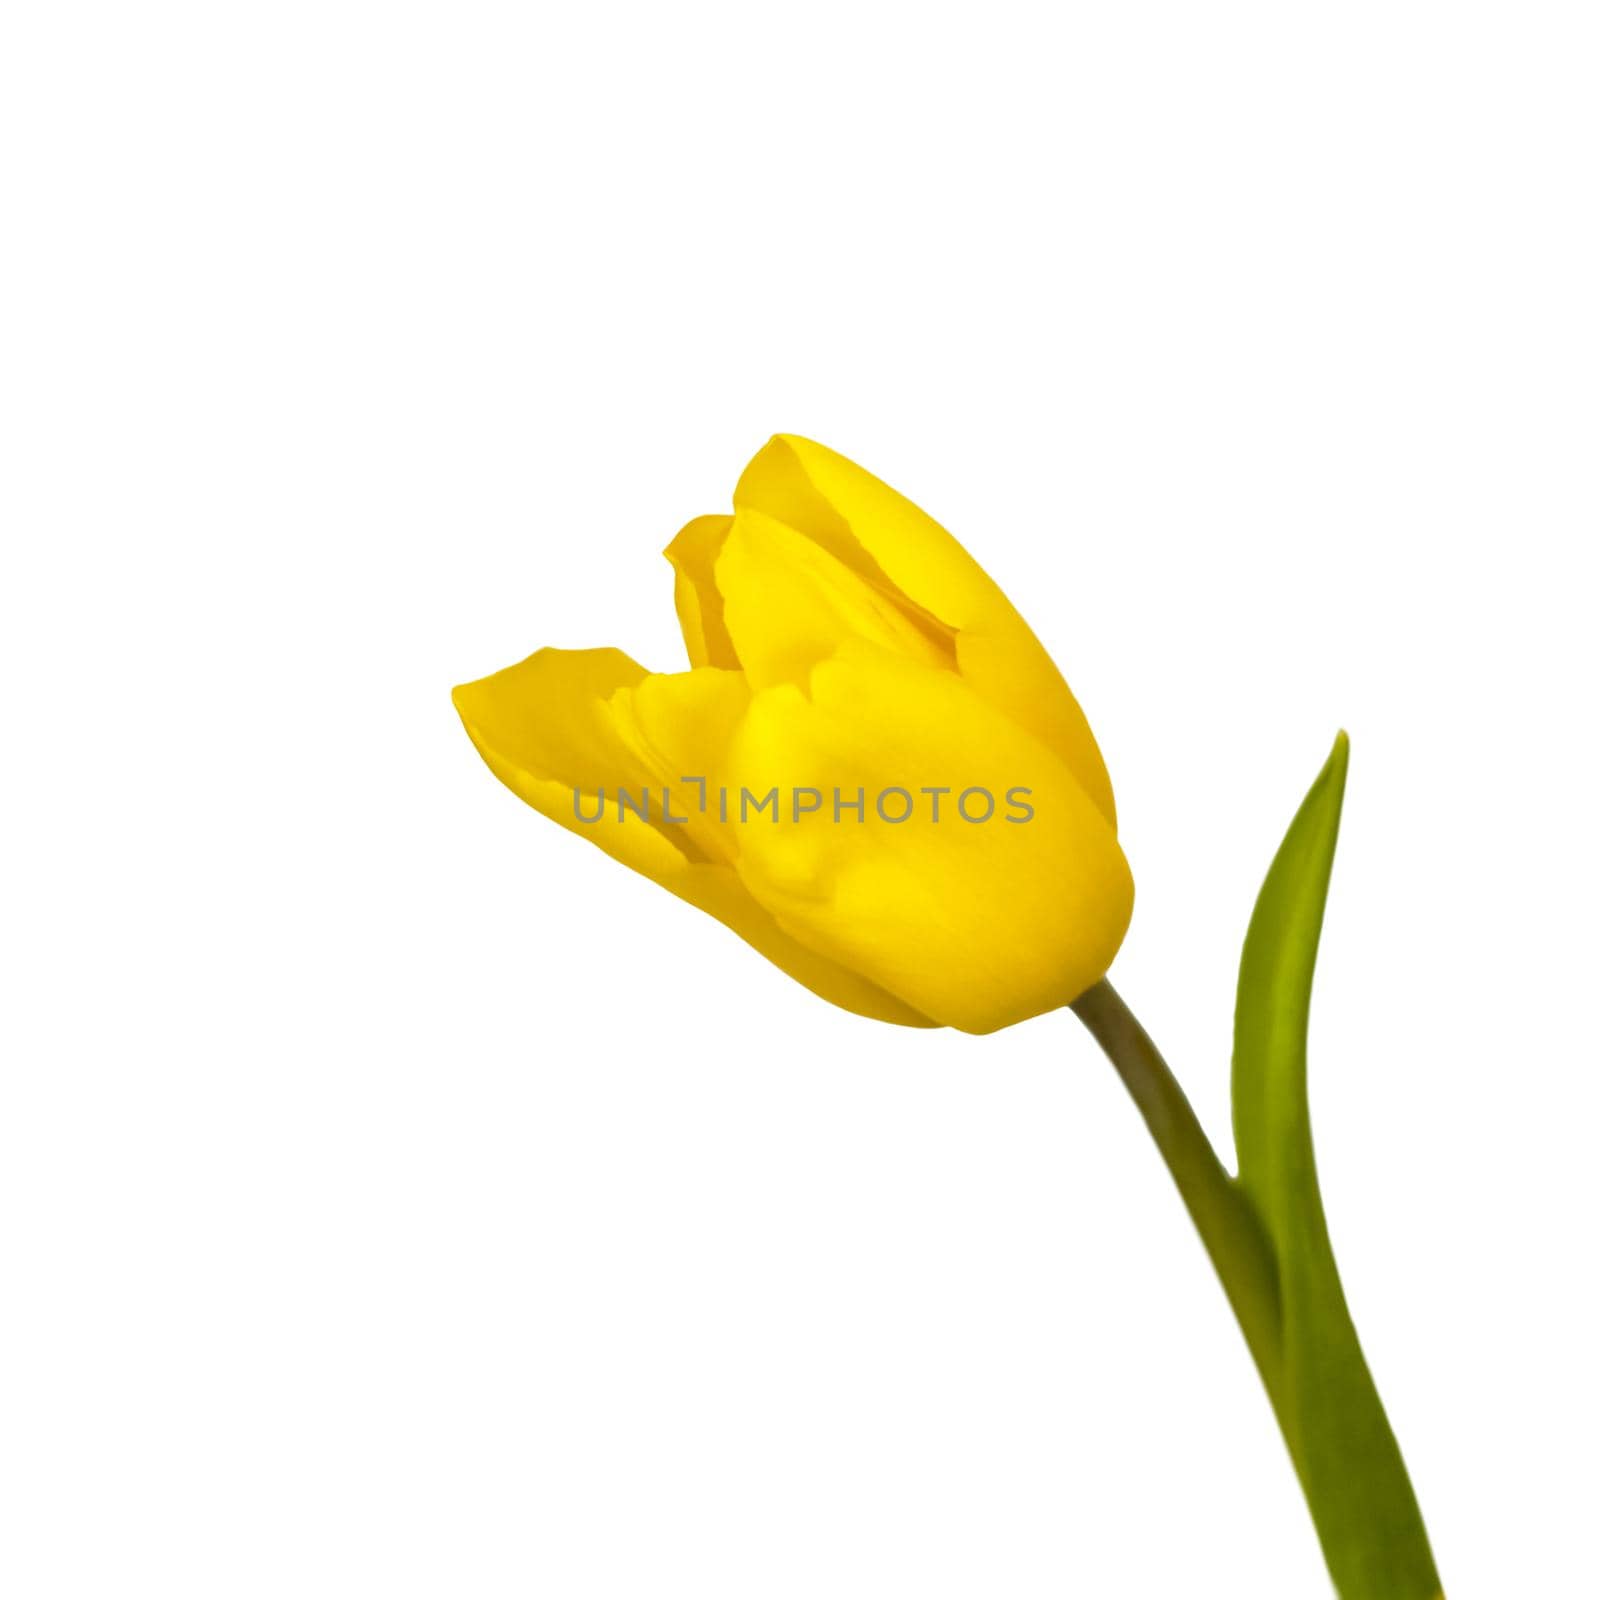 A bouquet of fresh yellow tulips on a white isolated background. Spring flowers in a vase. The concept of spring.